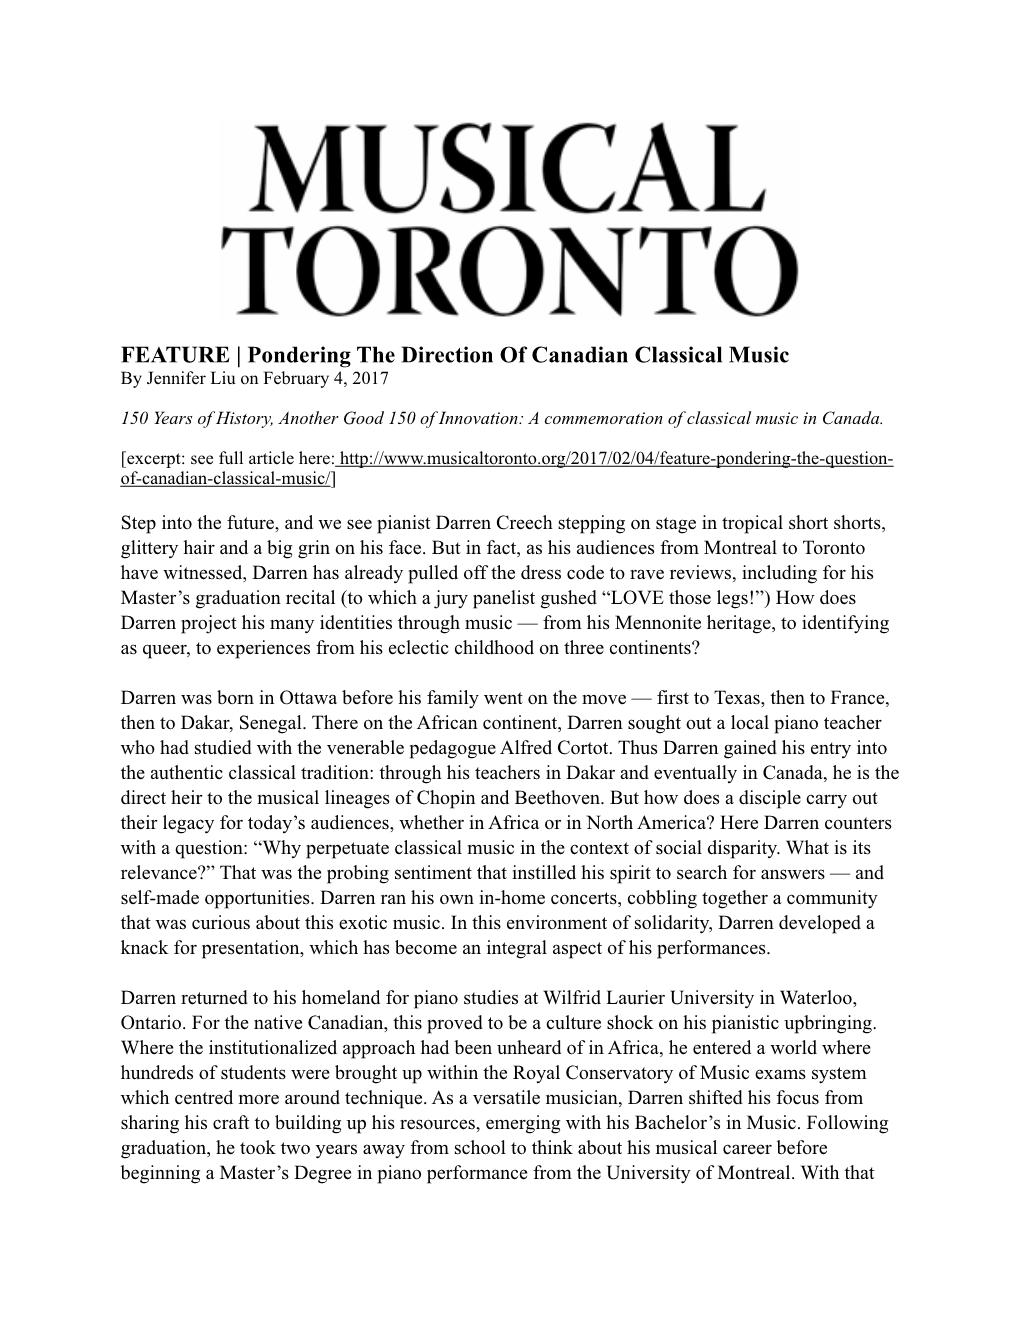 FEATURE | Pondering the Direction of Canadian Classical Music by Jennifer Liu on February 4, 2017